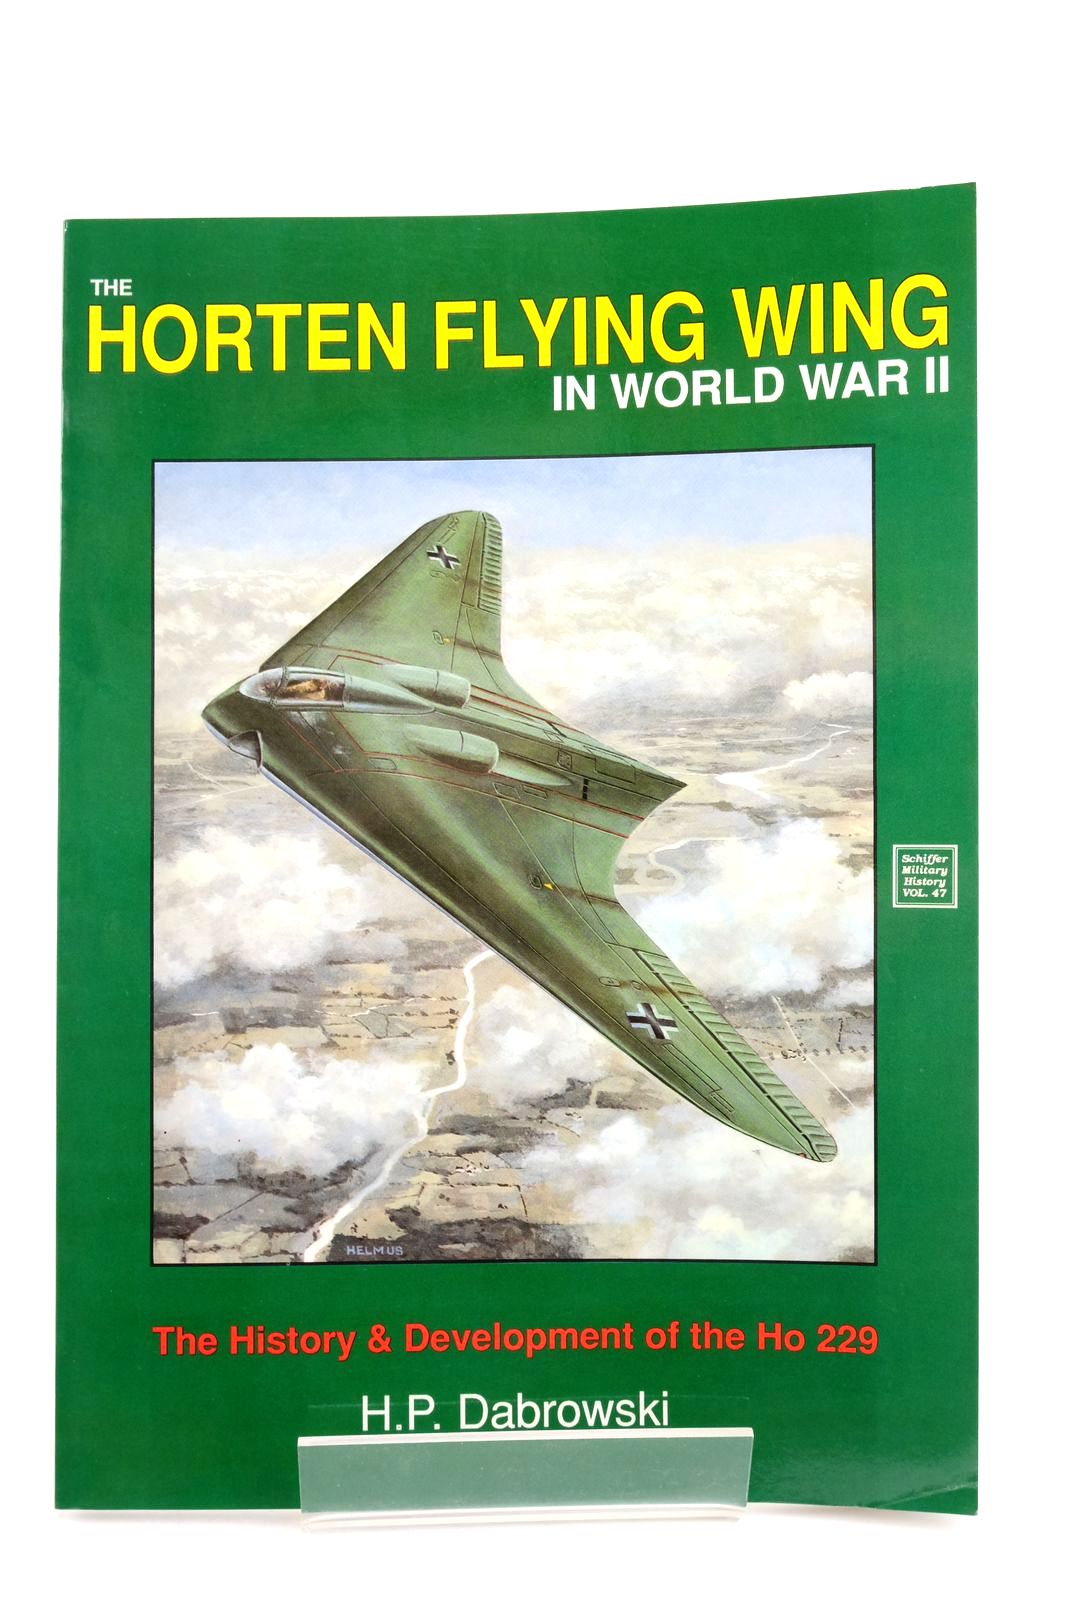 Photo of THE HORTEN FLYING WING IN WORLD WAR II written by Dabrowski, Hans-Peter published by Schiffer Publishing Ltd. (STOCK CODE: 2138729)  for sale by Stella & Rose's Books